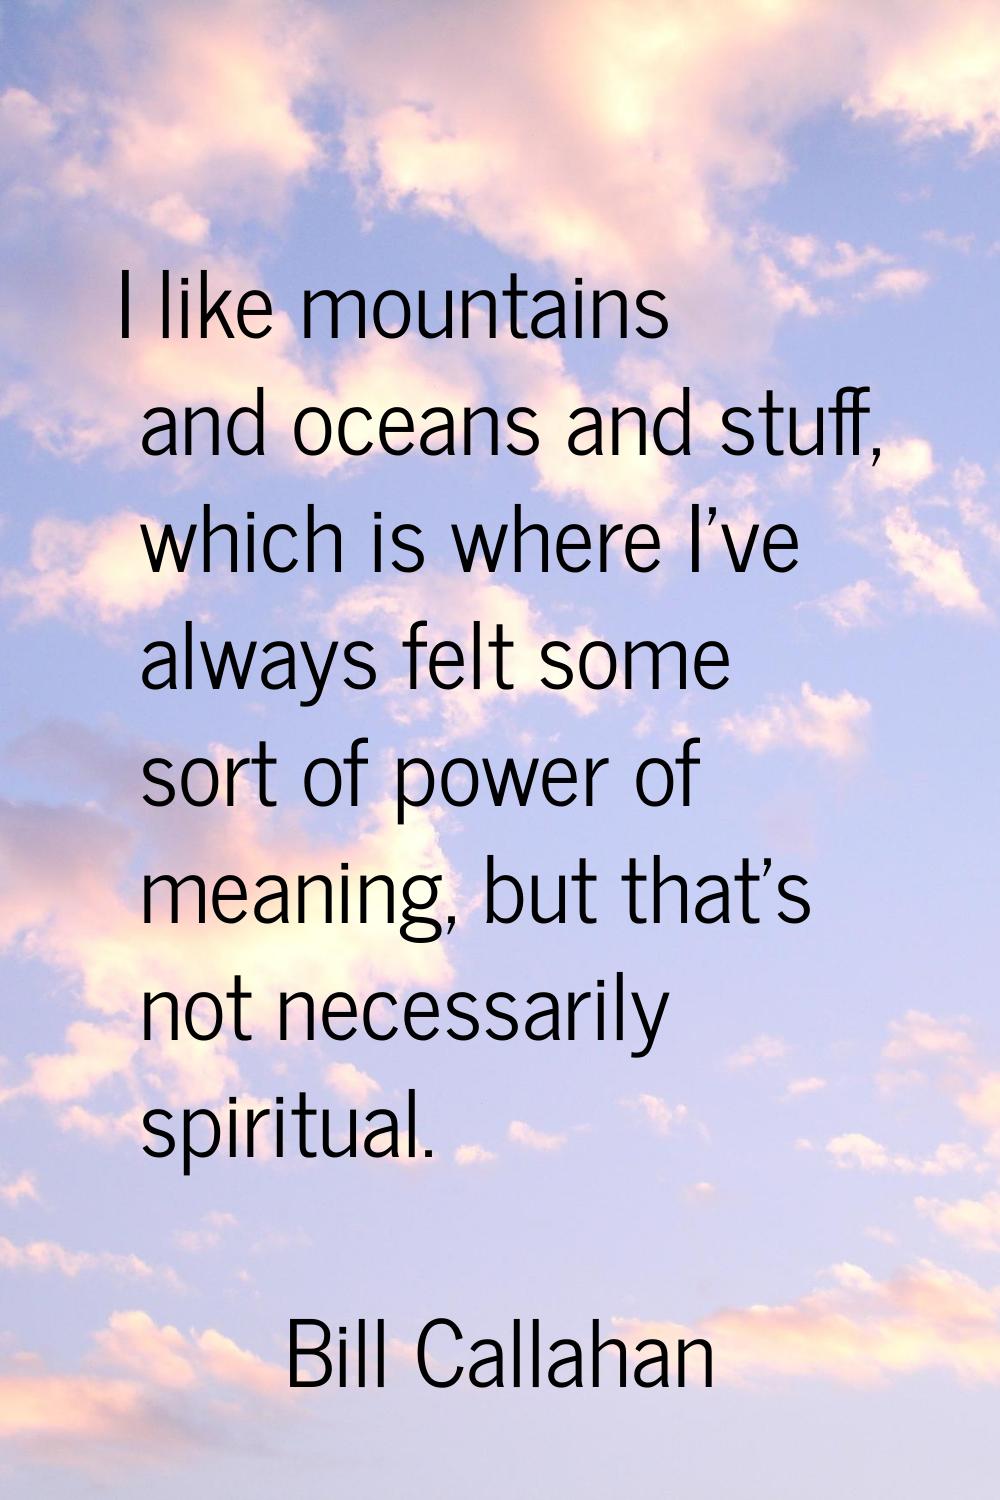 I like mountains and oceans and stuff, which is where I've always felt some sort of power of meanin